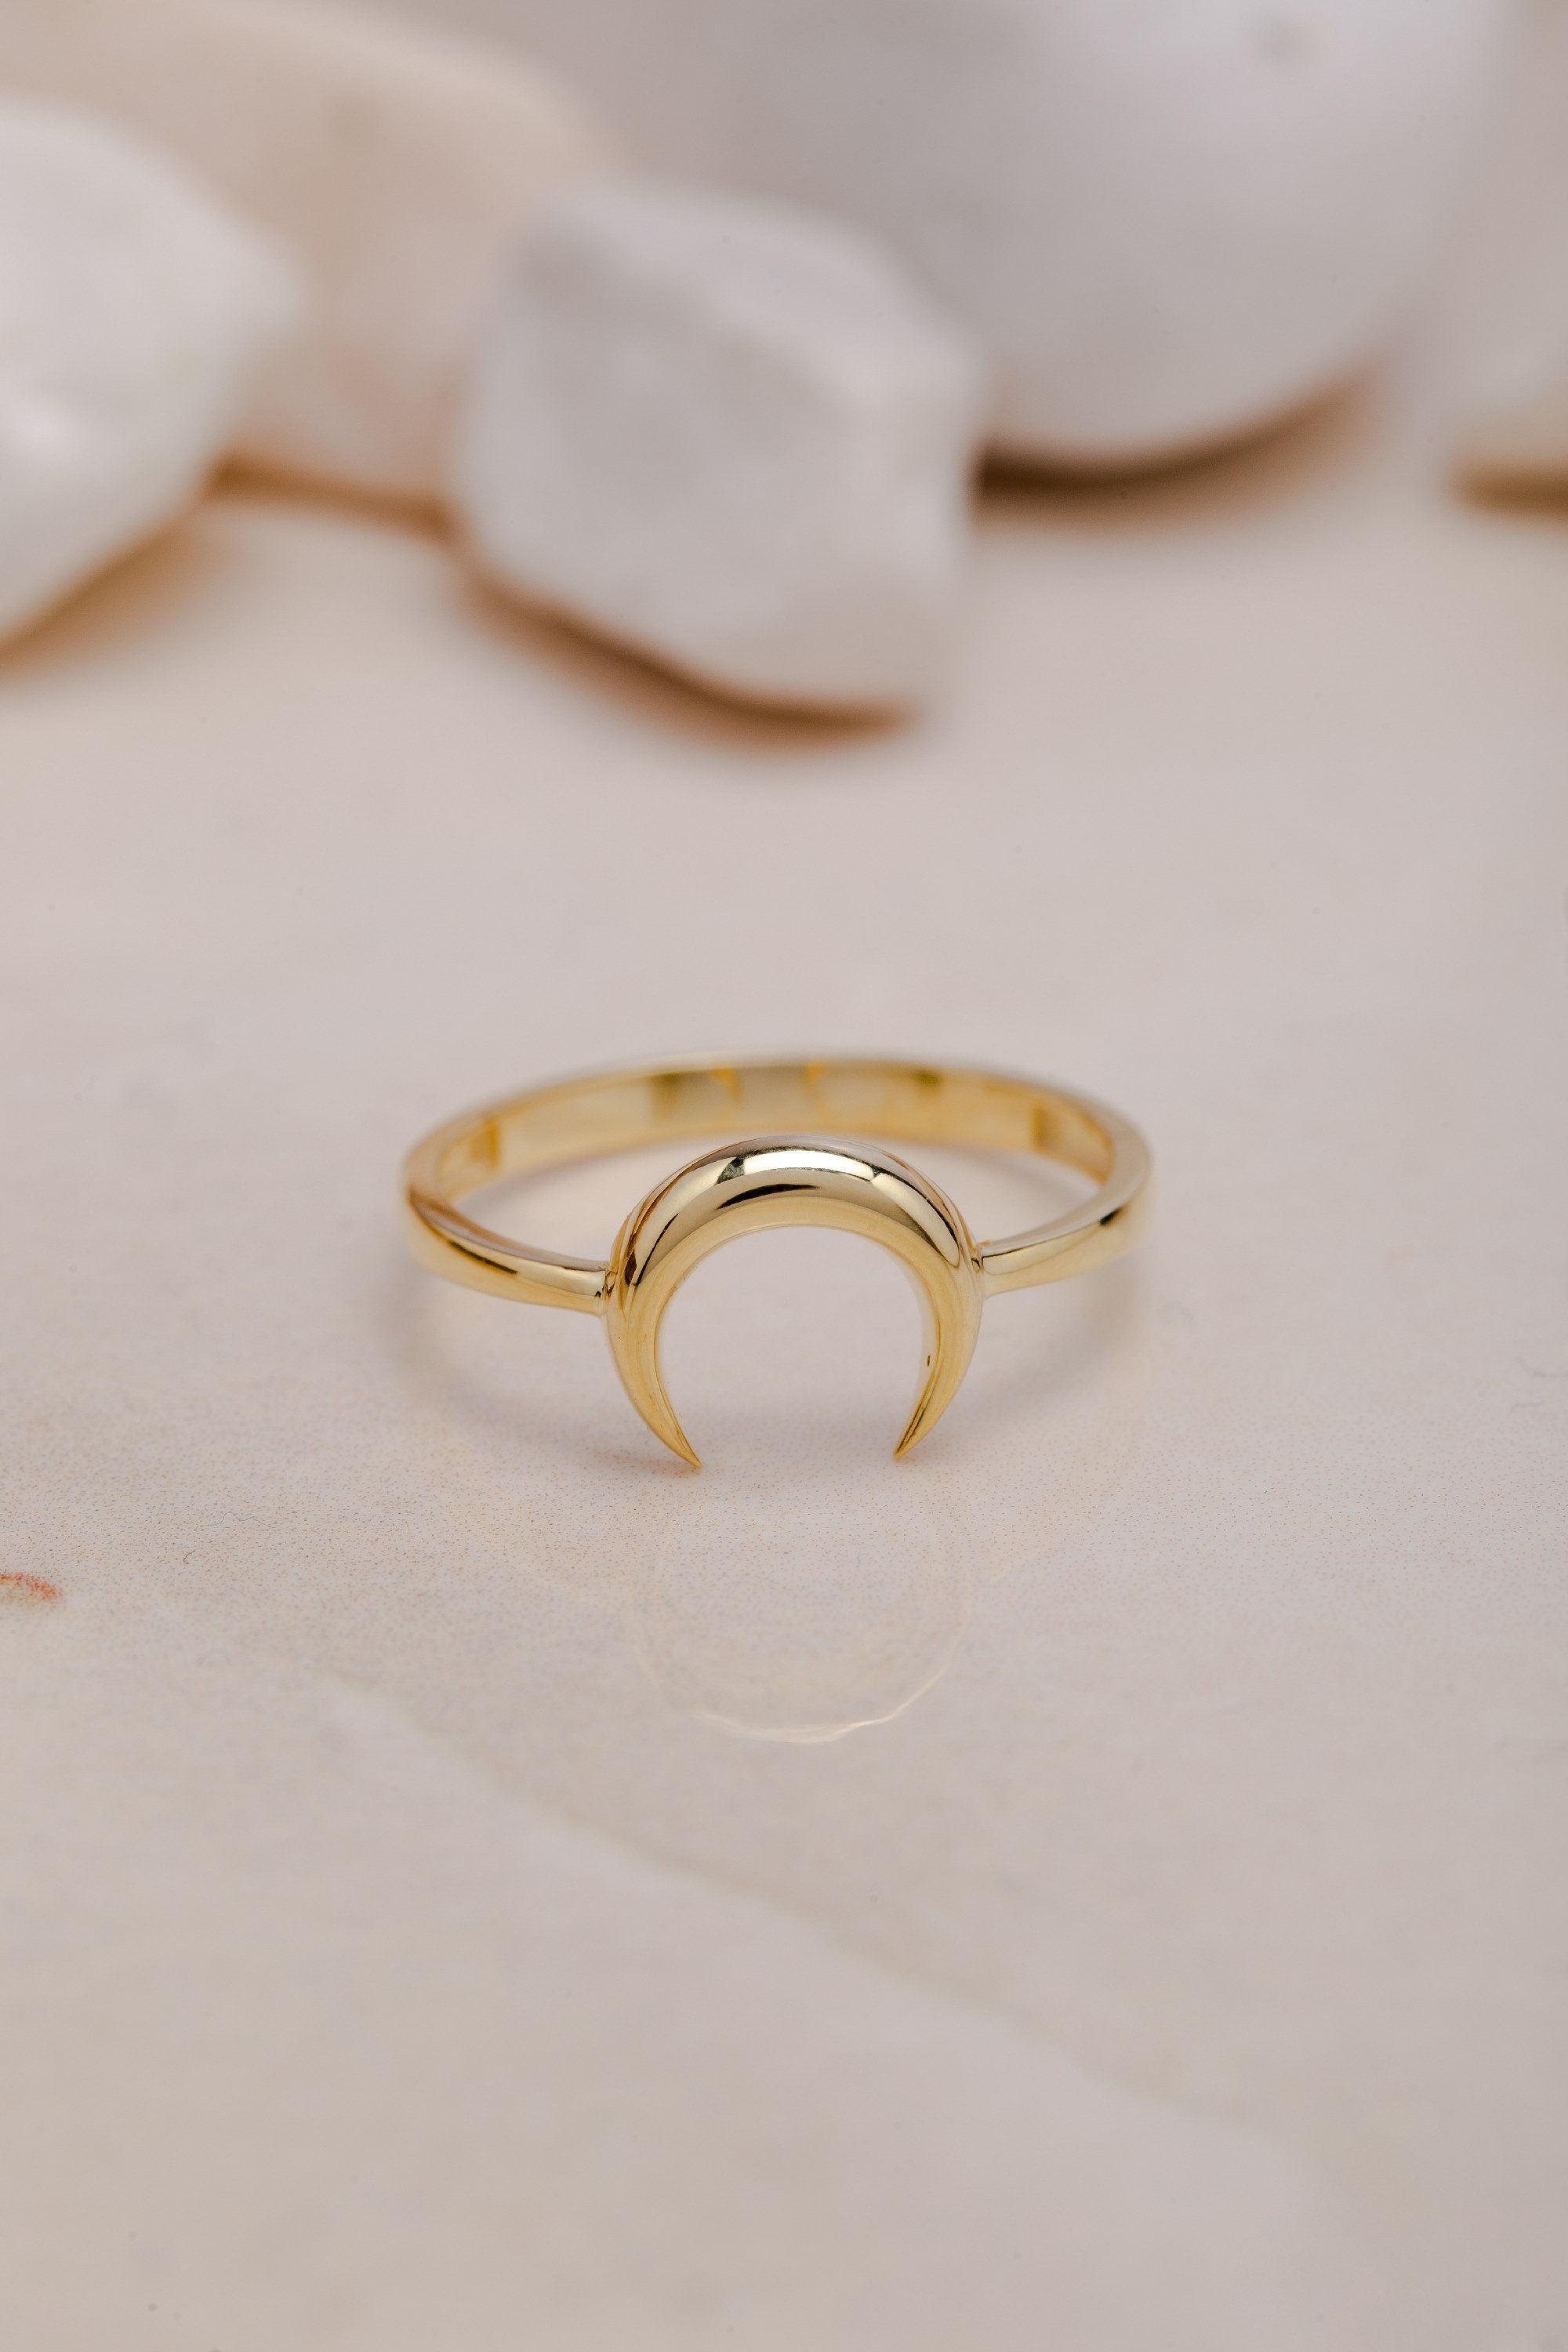 Mother Day Jewelry18K Celestial Moon Ring, Minimalist Ring, Dainty ring, Delicate Ring, Minimal Ring, Cute Ring, ,Gift For Mother Day